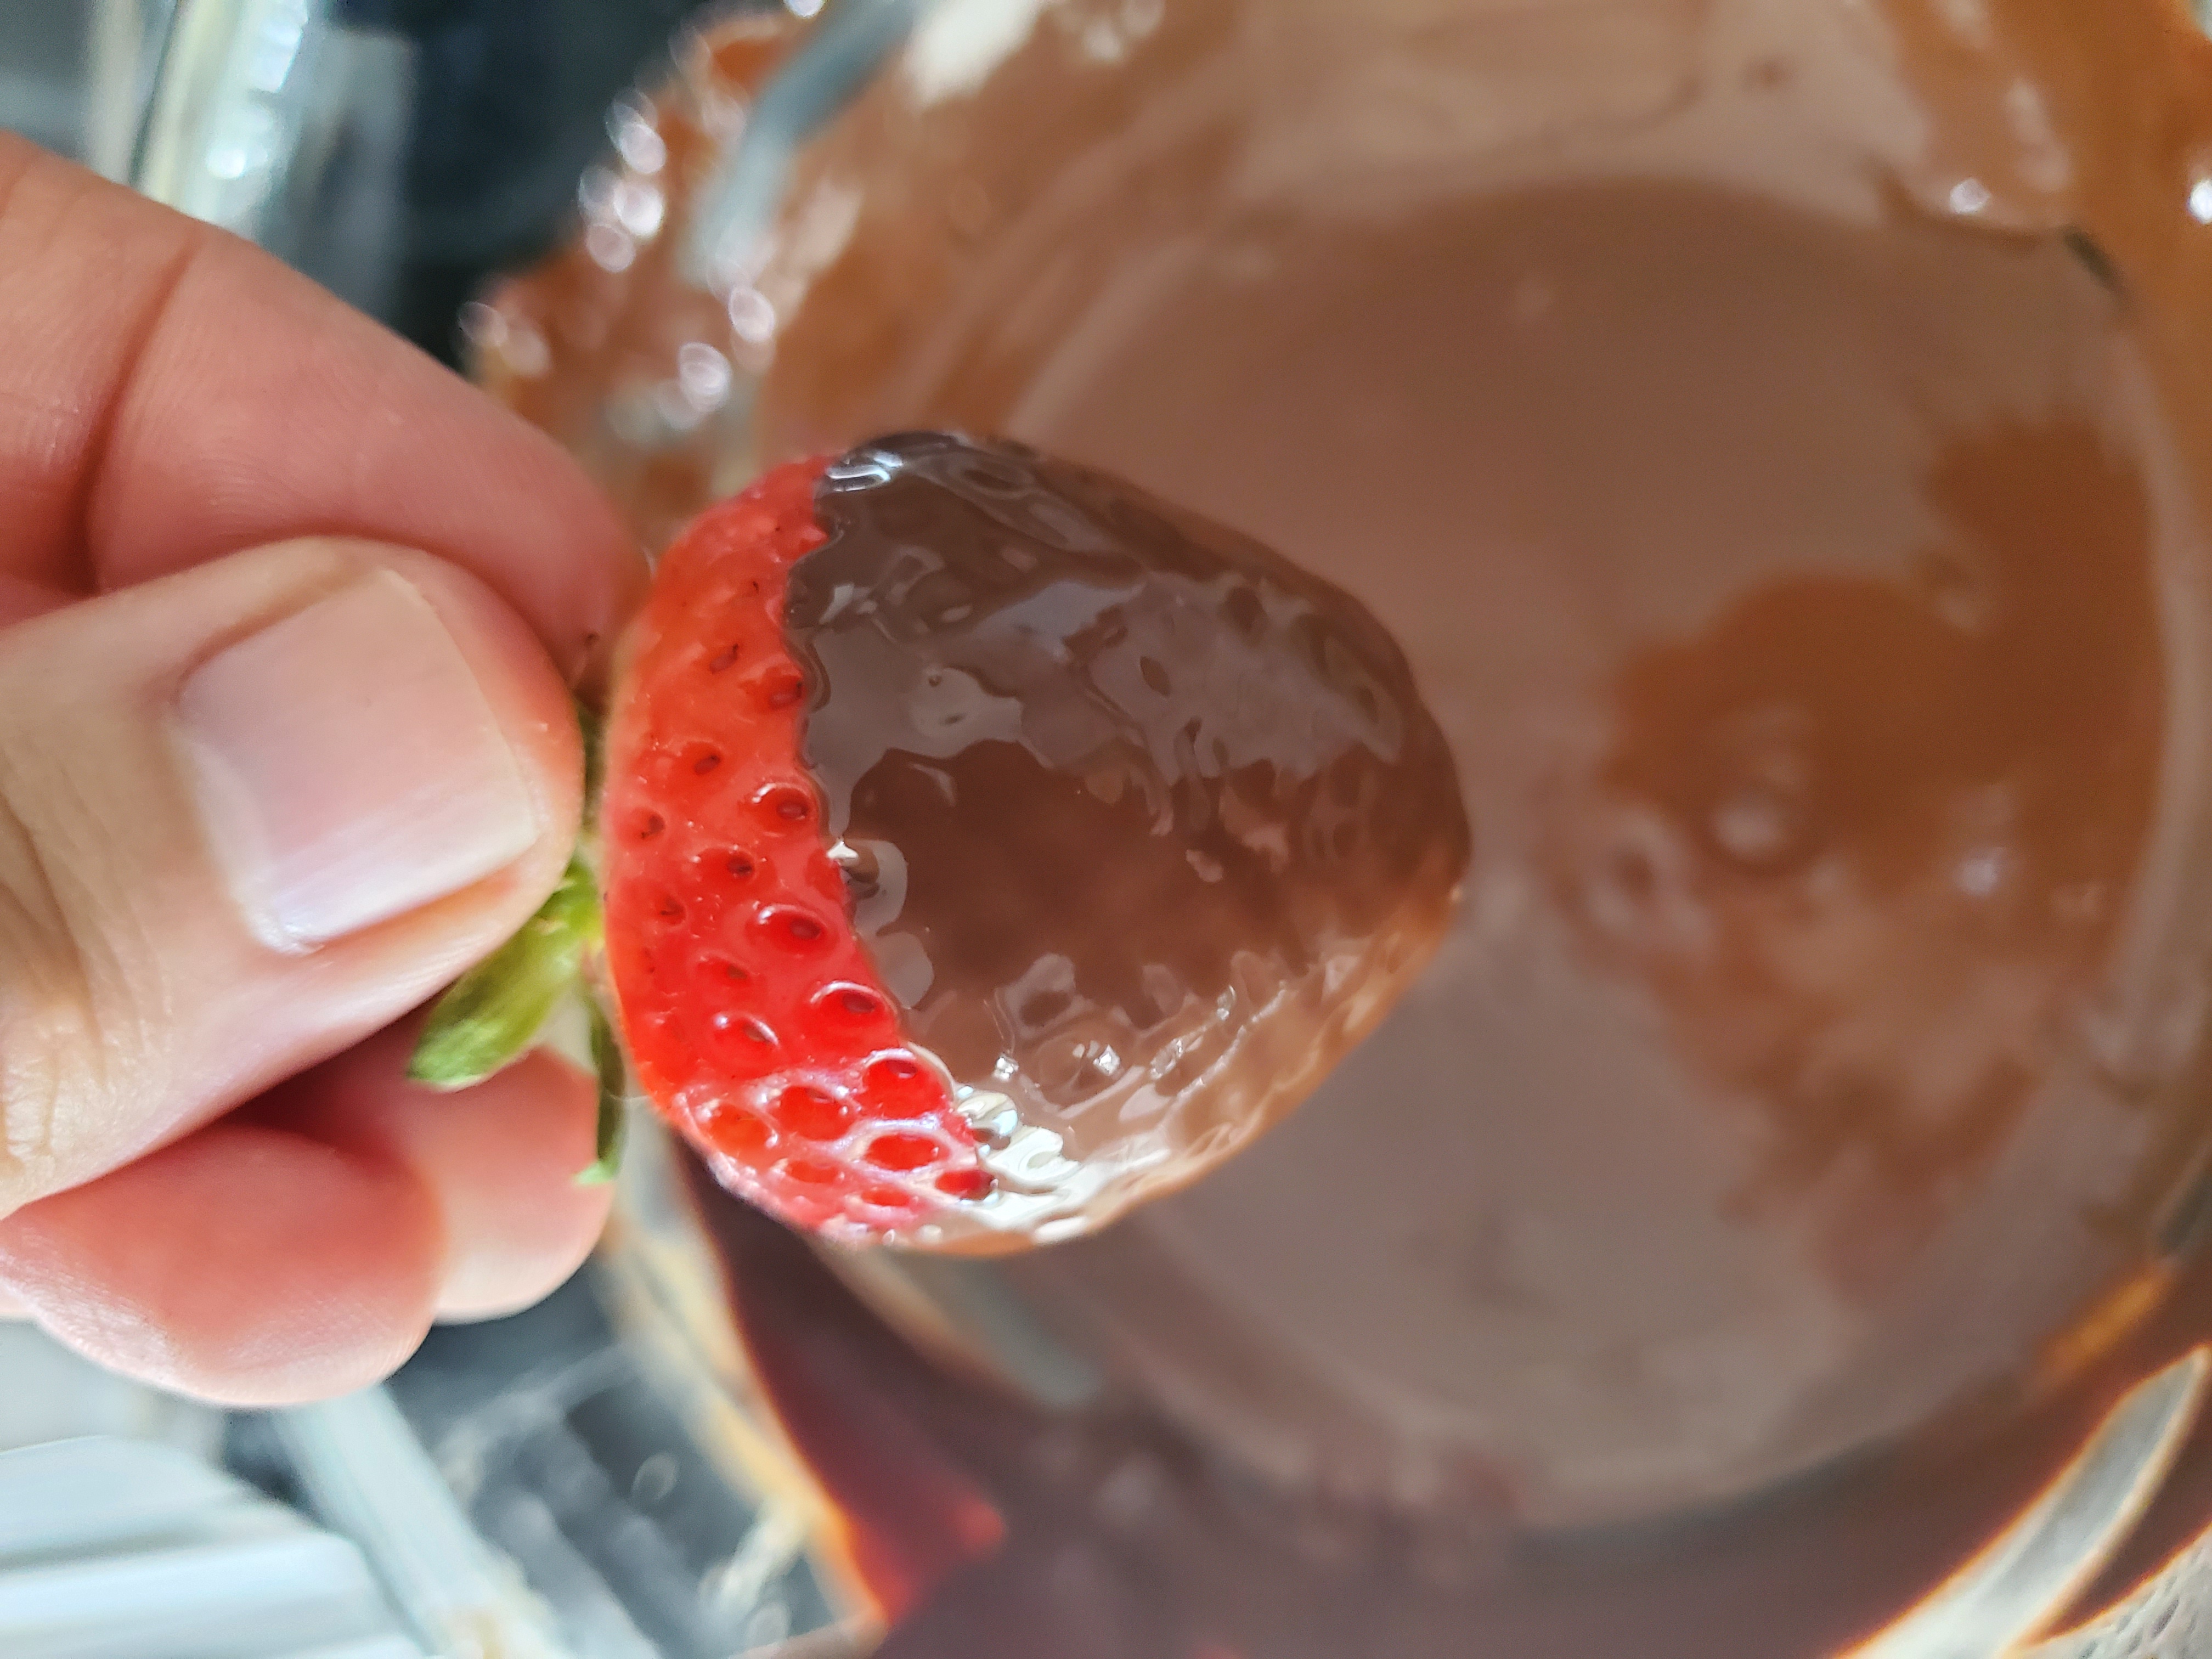 One strawberry dipped in the melted chocolate